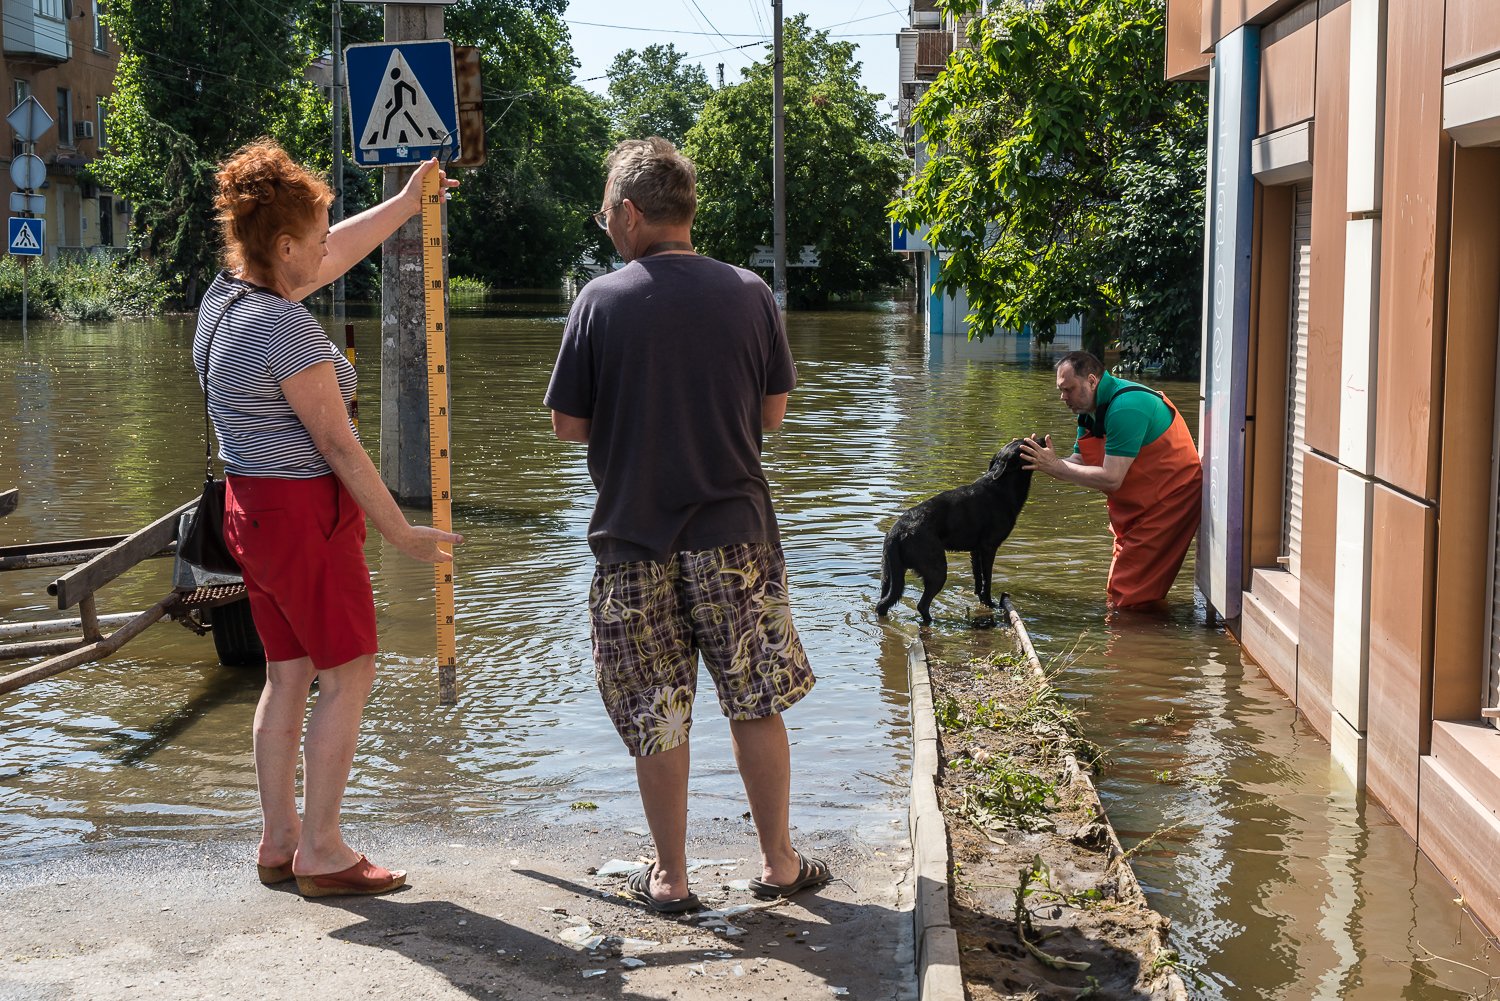  Lora Musian, left, a hydrologist from nearby Mykolaiv oblast, and volunteer Oleh Barkarneko, right, measure water levels in the city and pet a stray dog after the destruction of the hydroelectric dam at Nova Kakhovka flooded downstream communities o